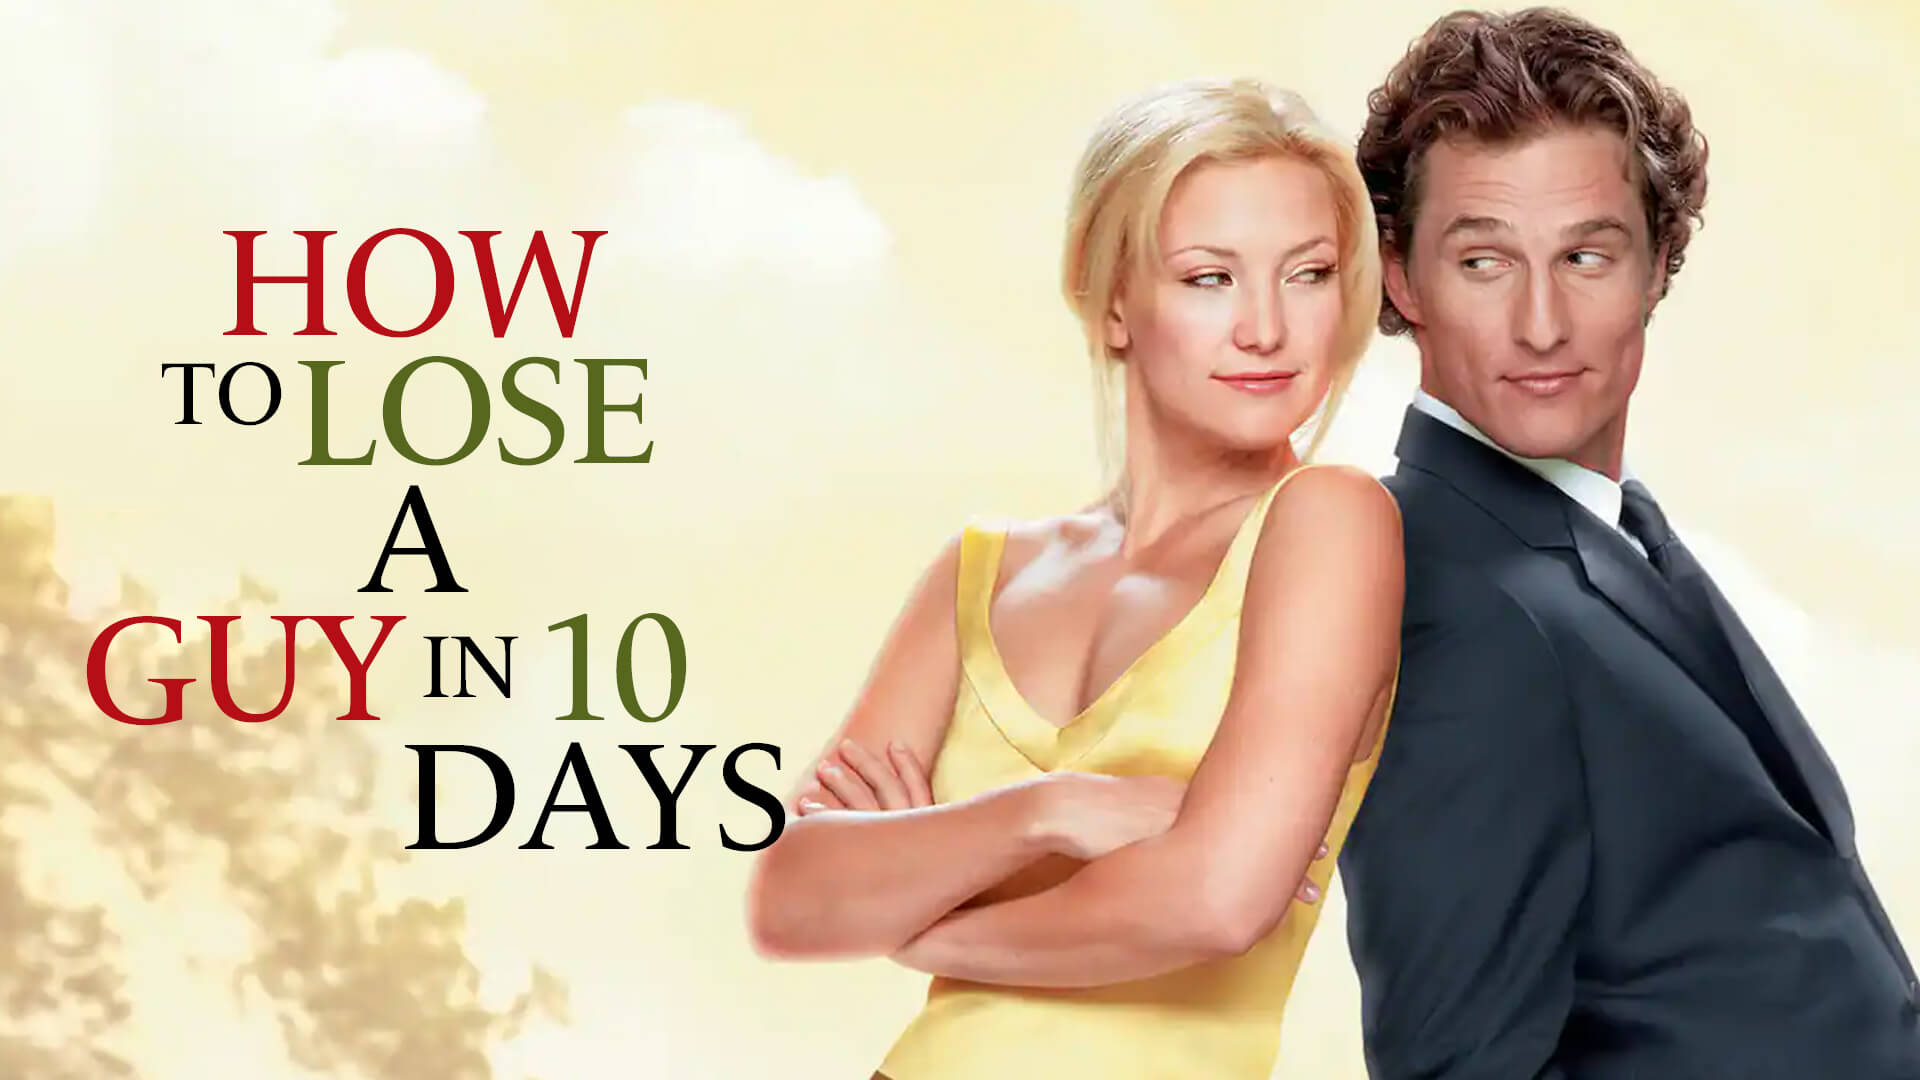 How-to-Lose-a-Guy-in-10-Days-in-Canada-best-movie